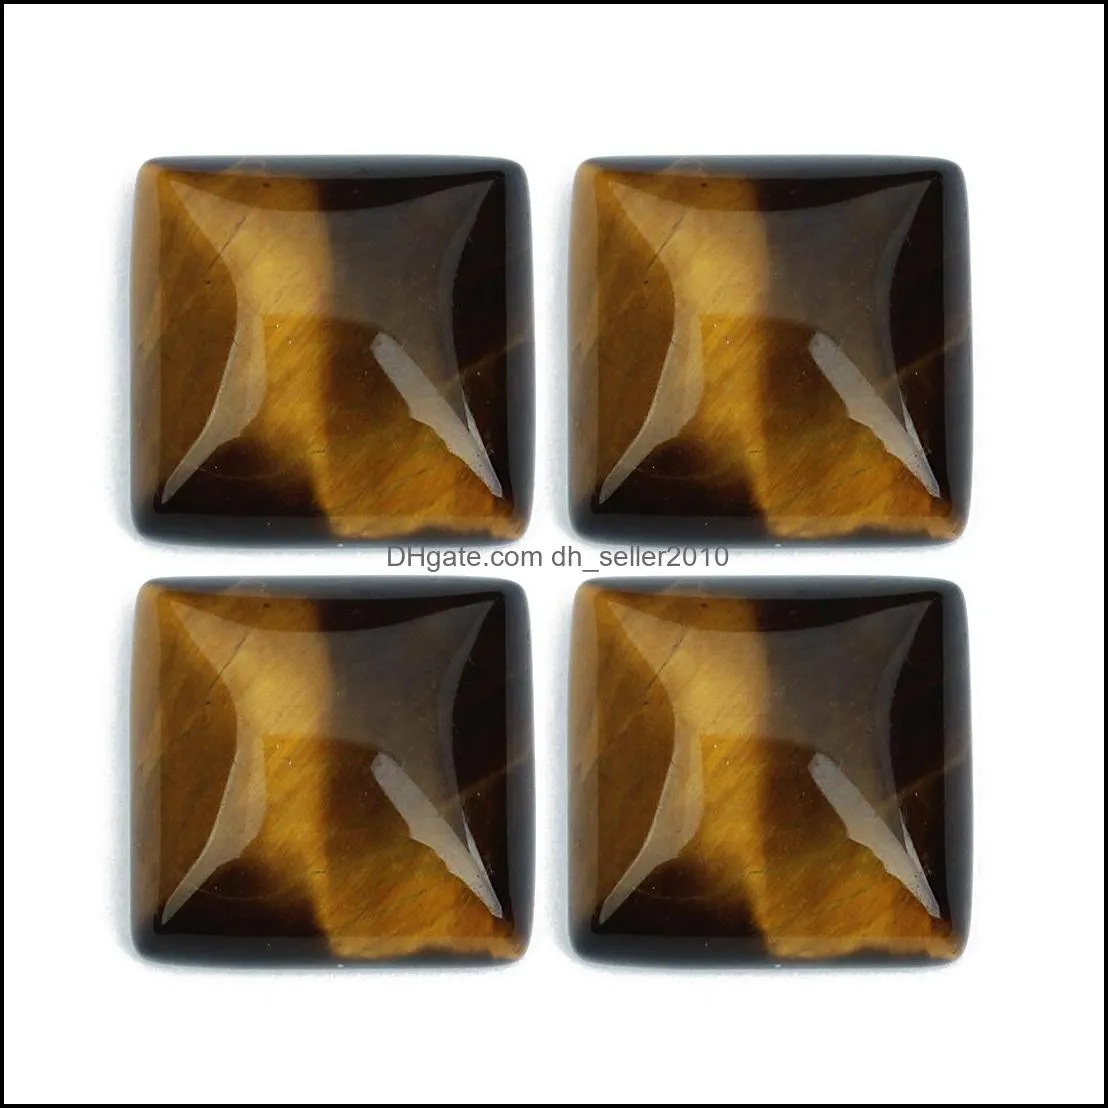 16mm square cutting opal rose tiger eye stone cab cabochon flat back for ring earring necklace making jewelry dhseller2010